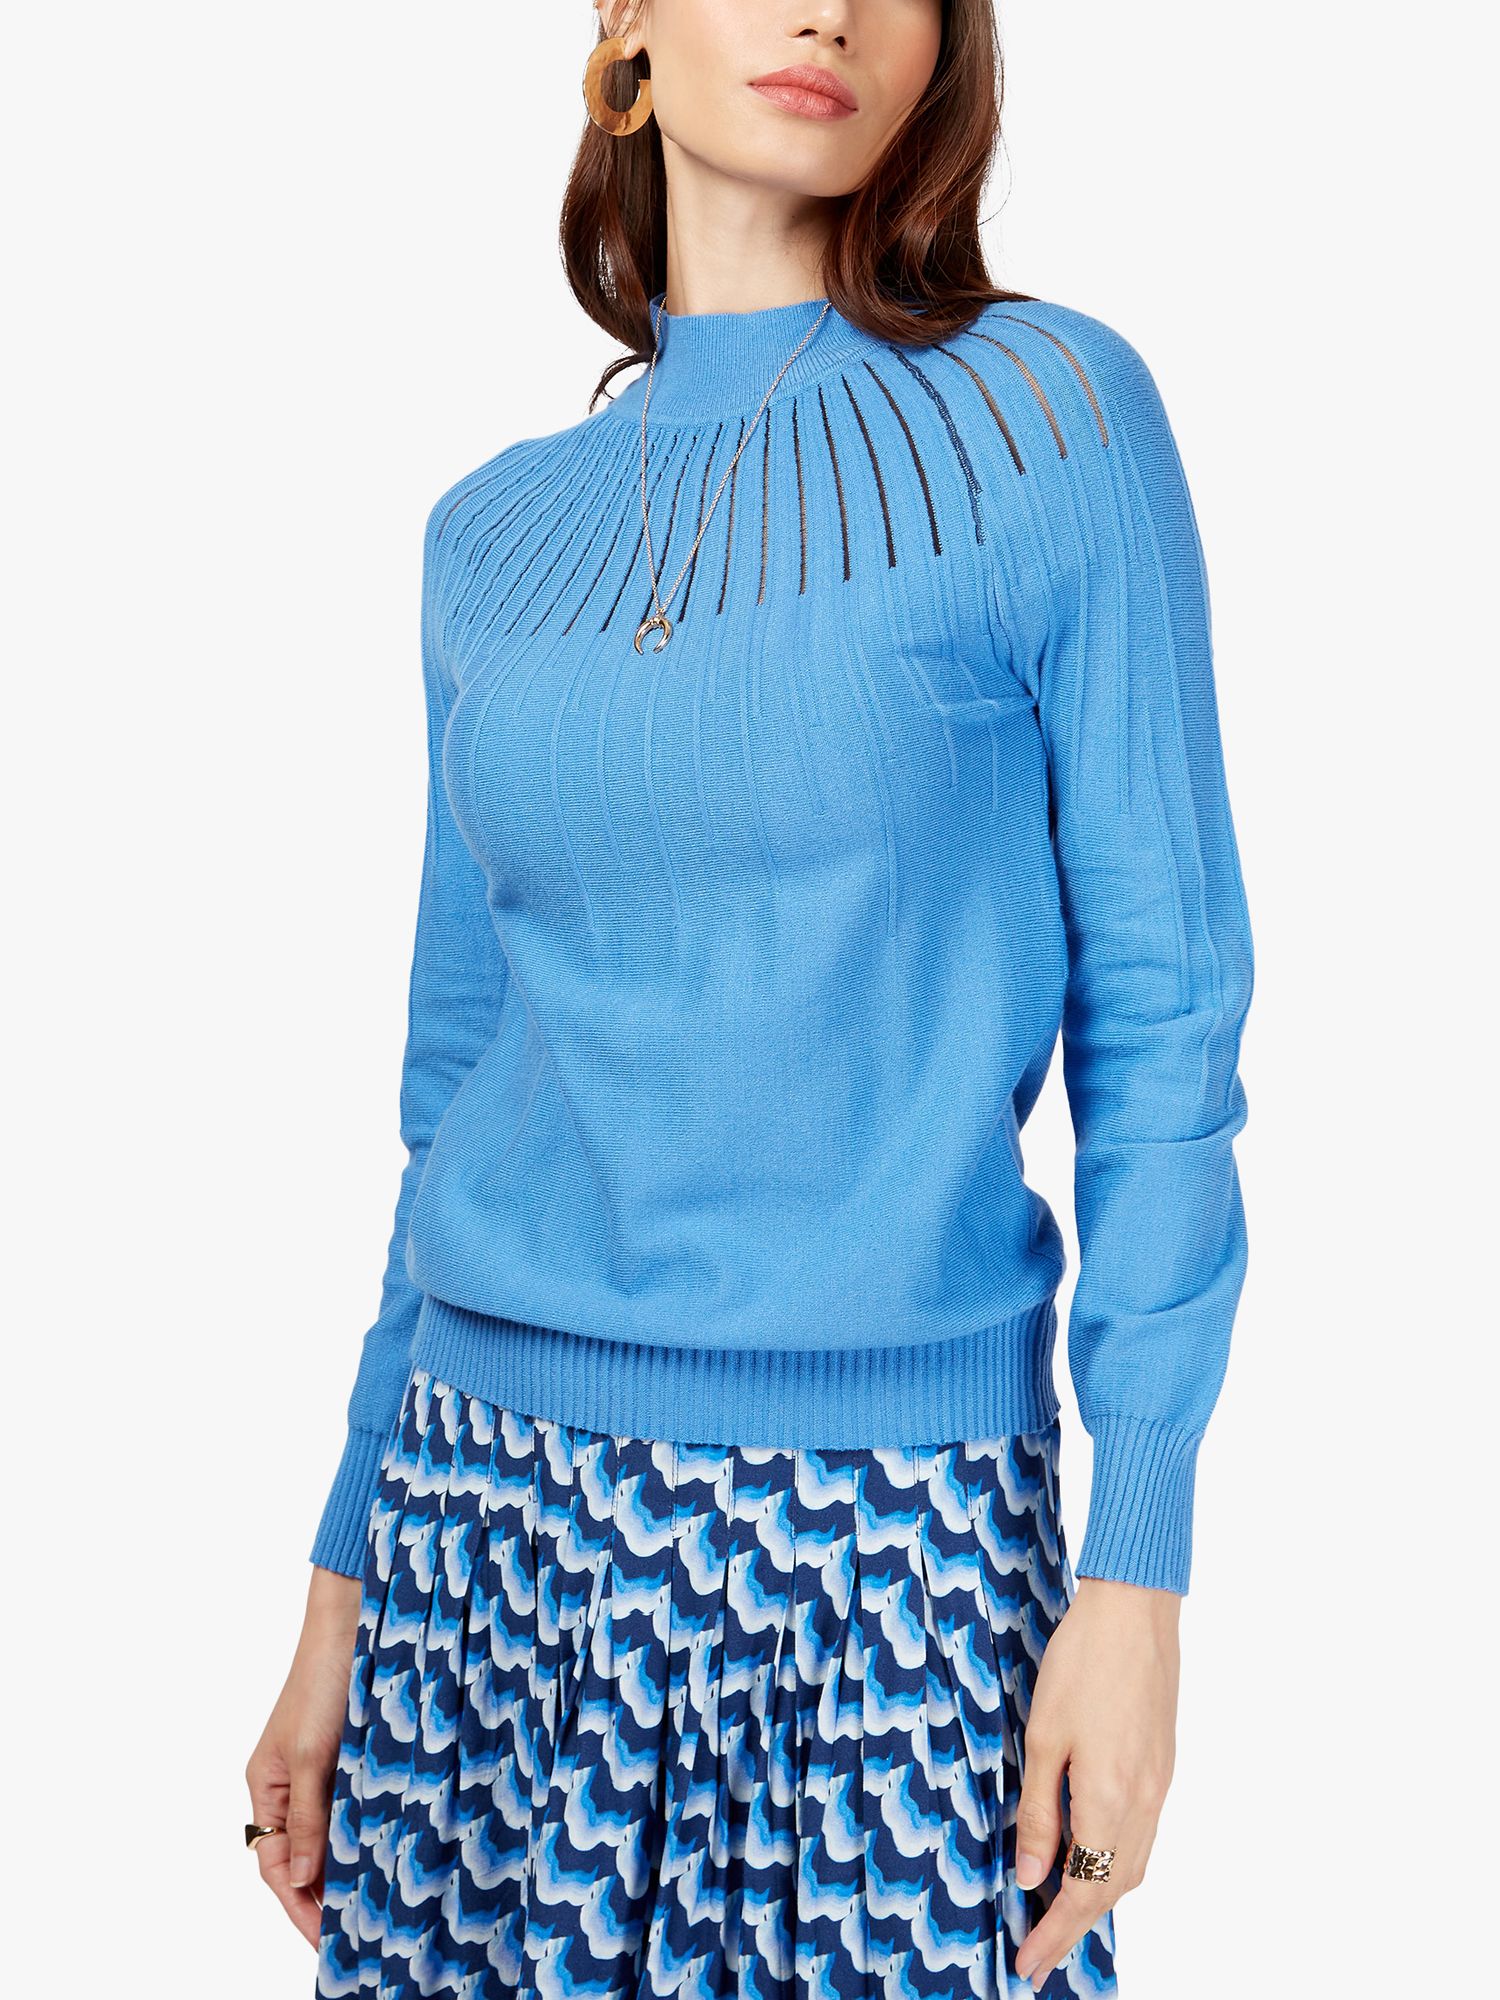 Somerset by Alice Temperley Cut Out Knitted Top, Blue at John Lewis ...